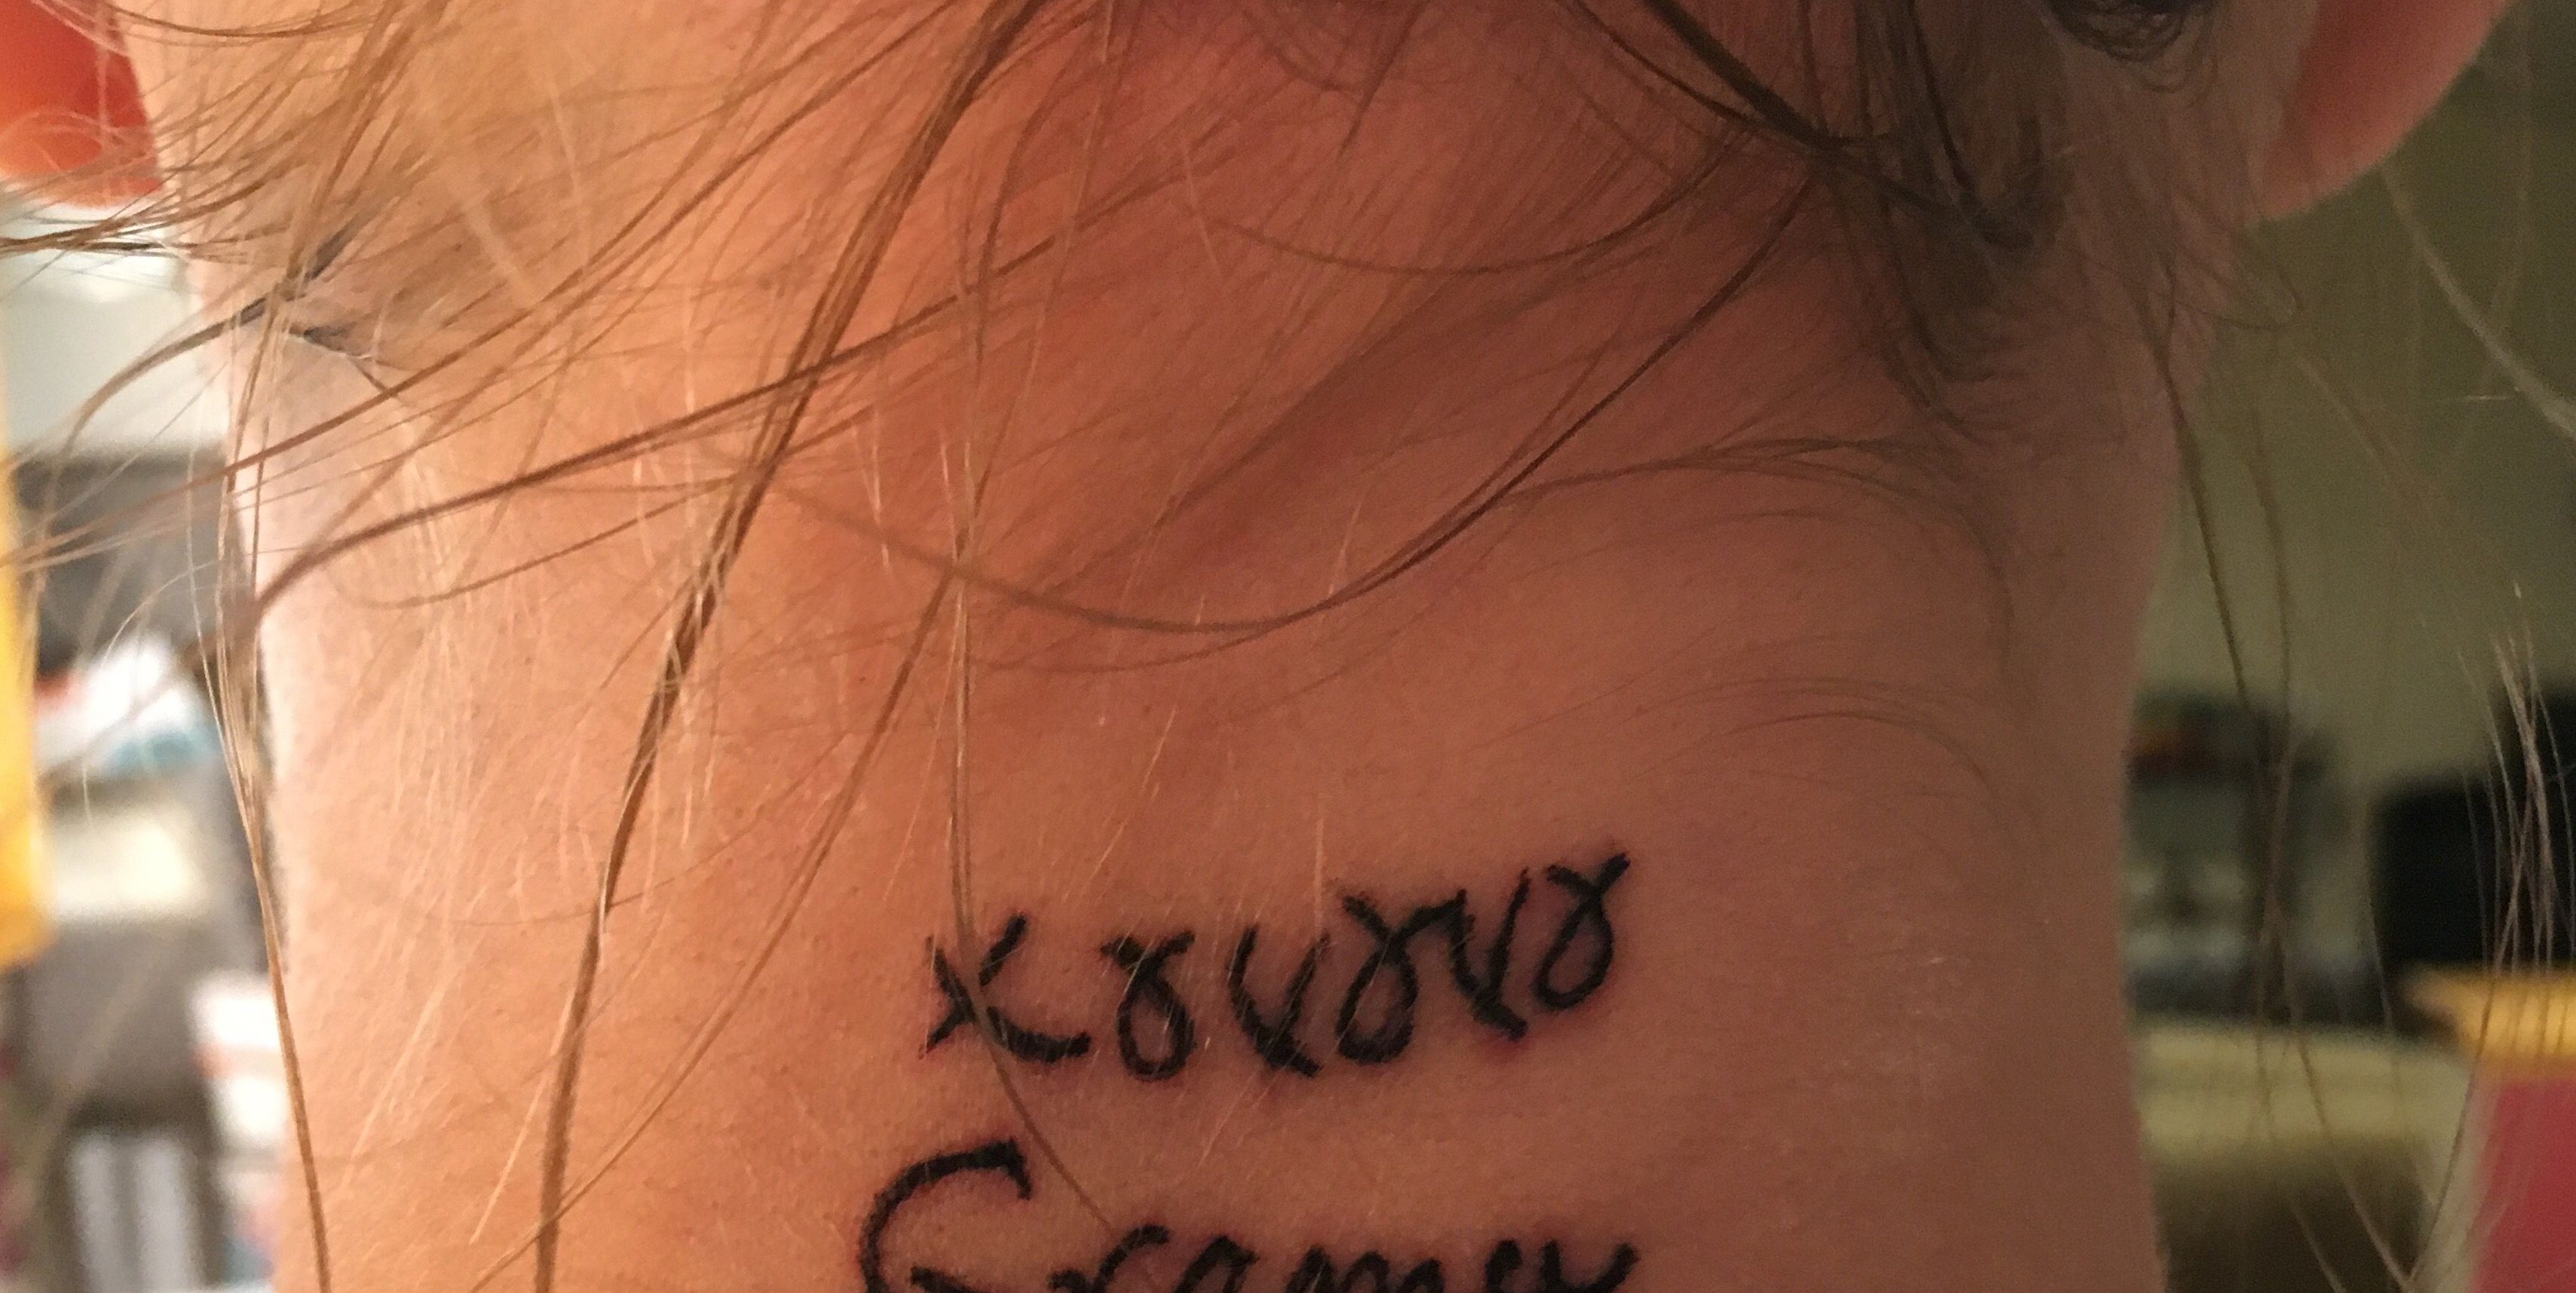 chest tattoos quotes about love